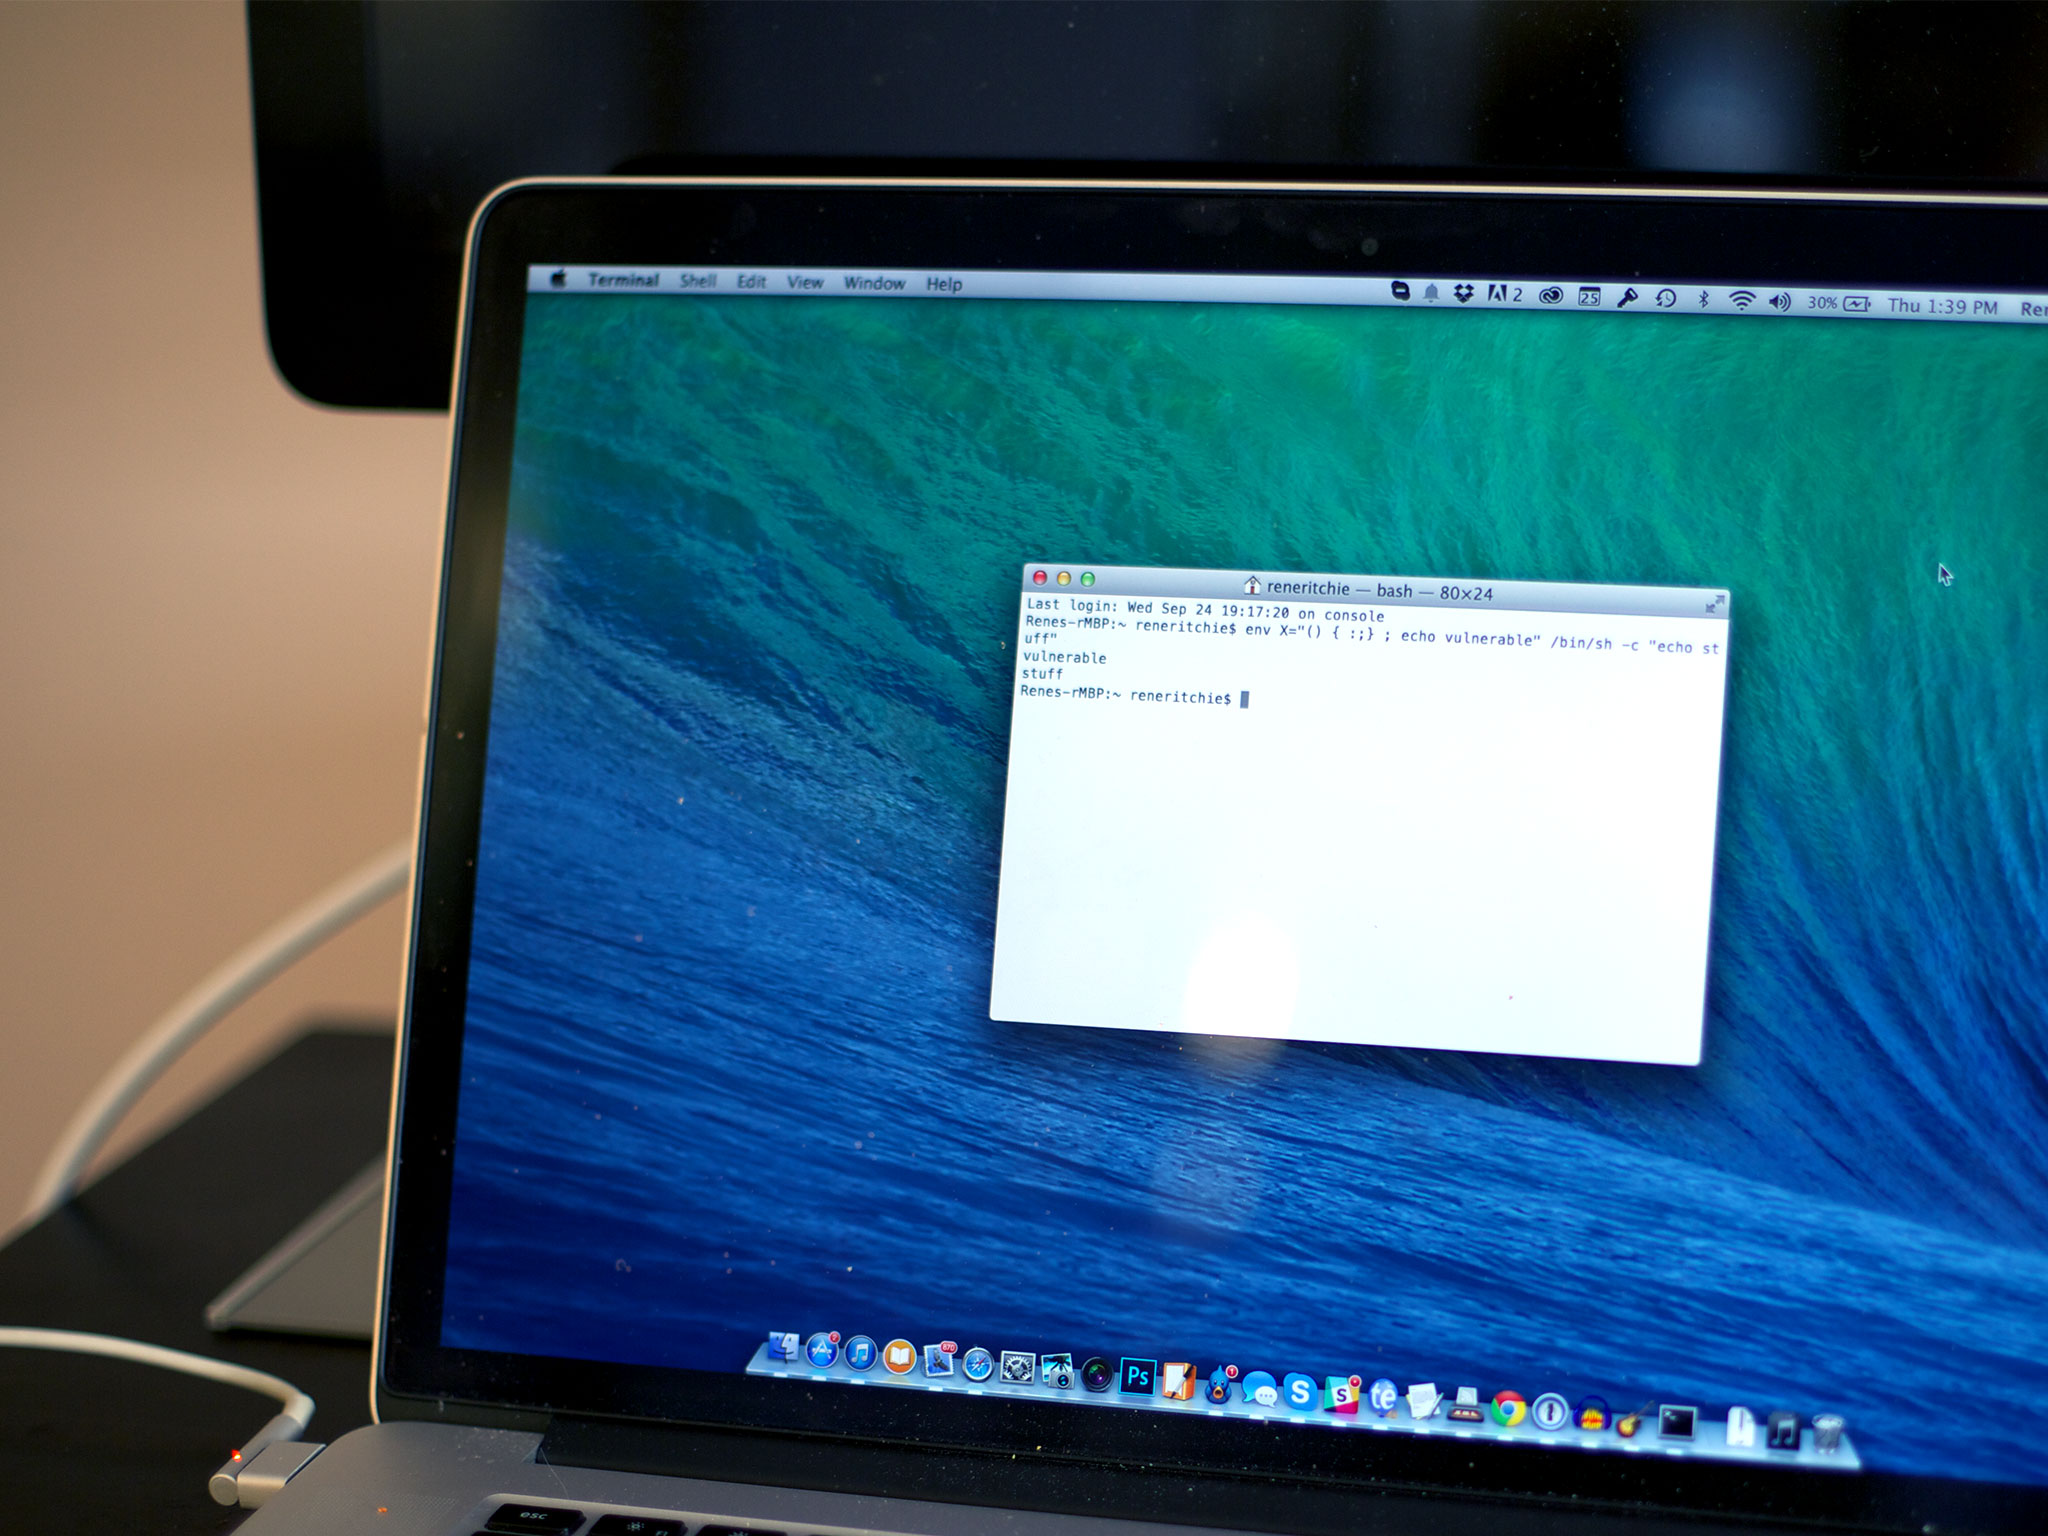 The 'Shellshock' Bash vulnerability and what it means for OS X